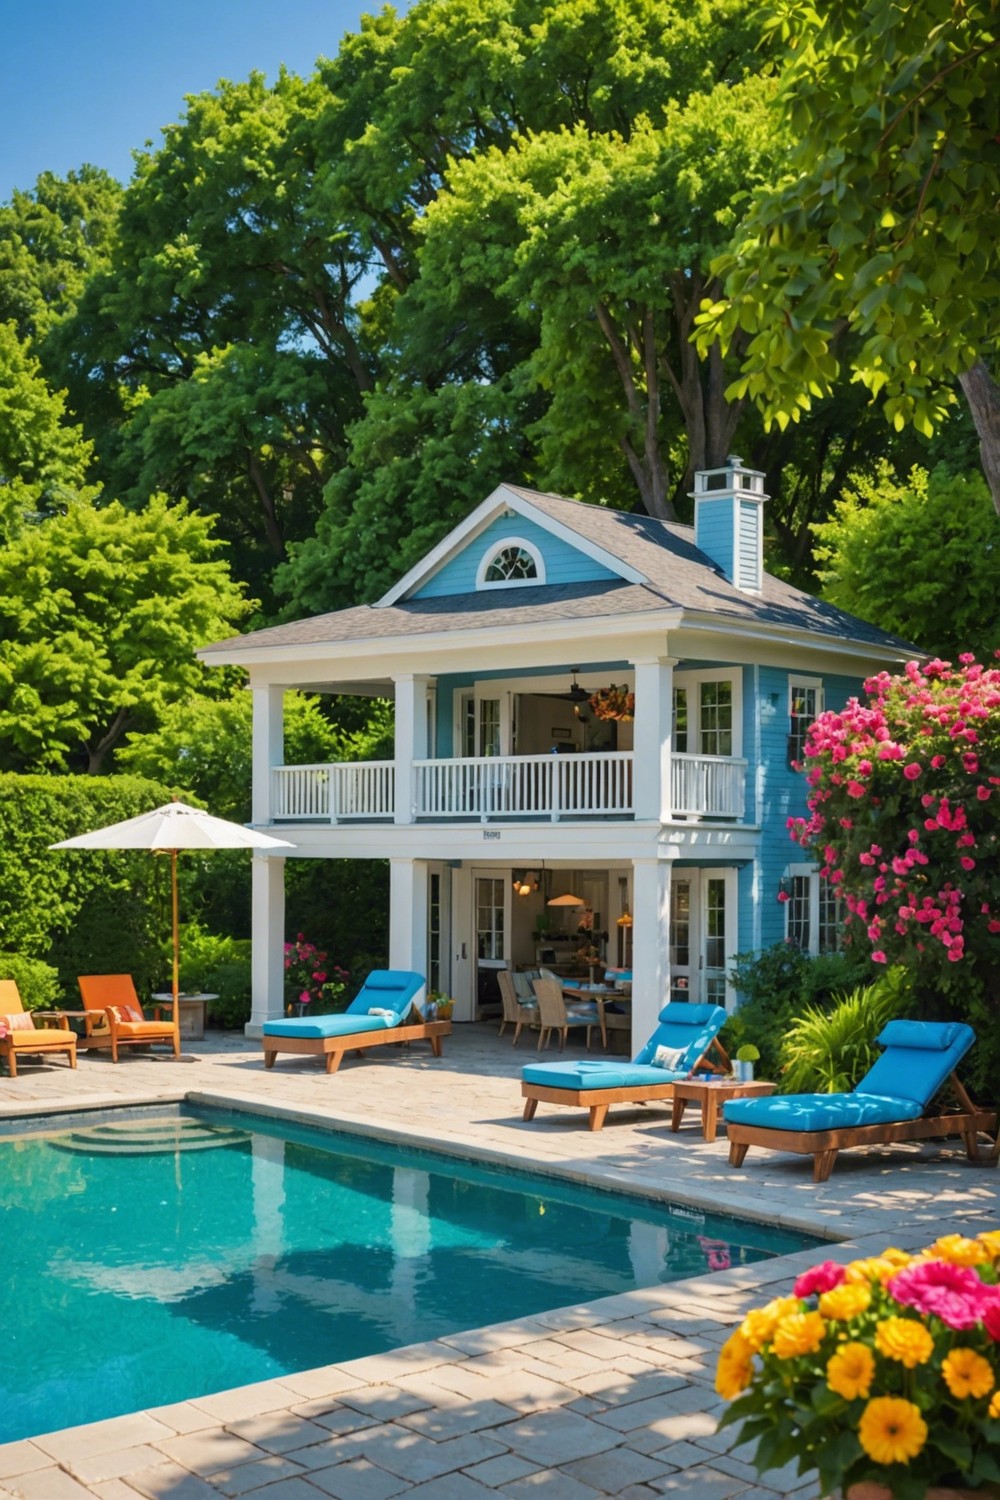 Pool House with Shade